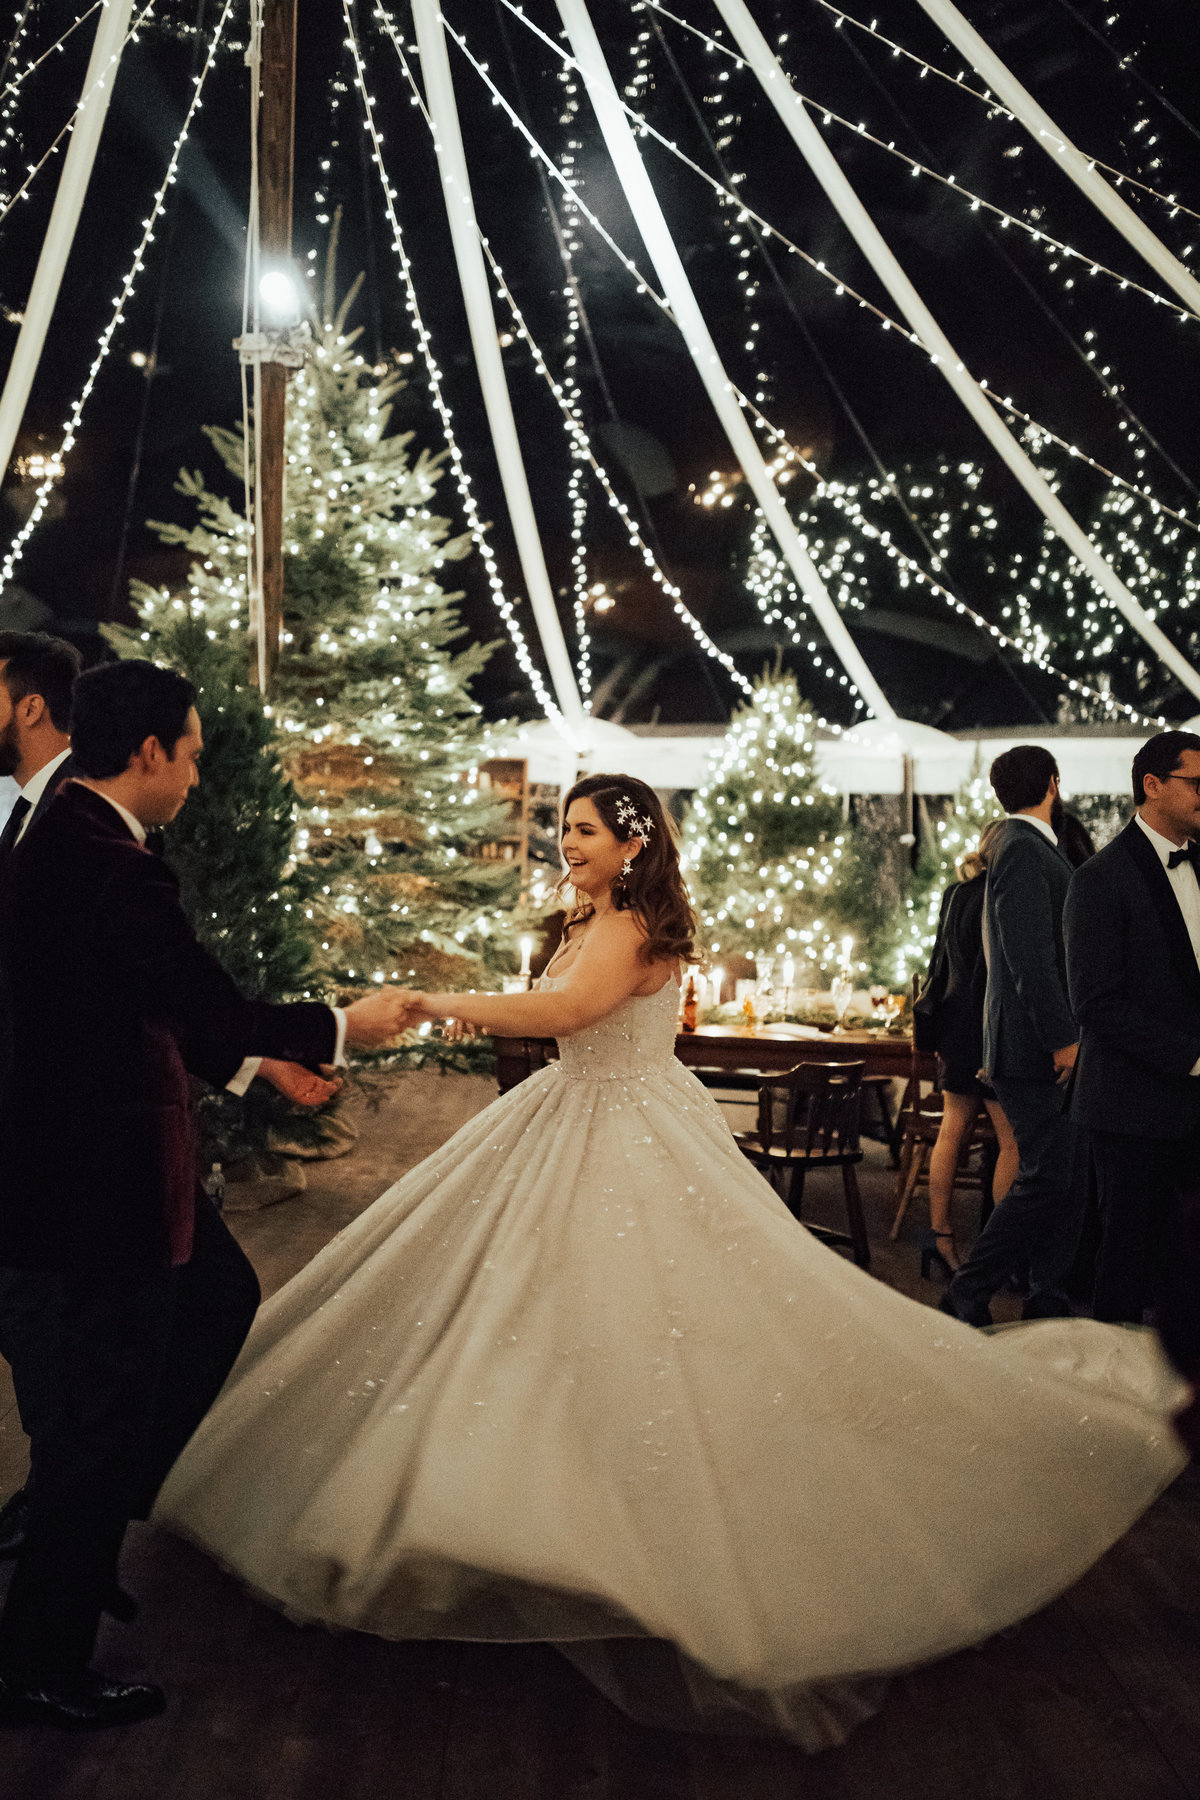 Christy-l-Johnston-Photography-Monica-Relyea-Events-Noelle-Downing-Instagram-Noelle_s-Favorite-Day-Wedding-Battenfelds-Christmas-tree-farm-Red-Hook-New-York-Hudson-Valley-upstate-november-2019-AP1A9936